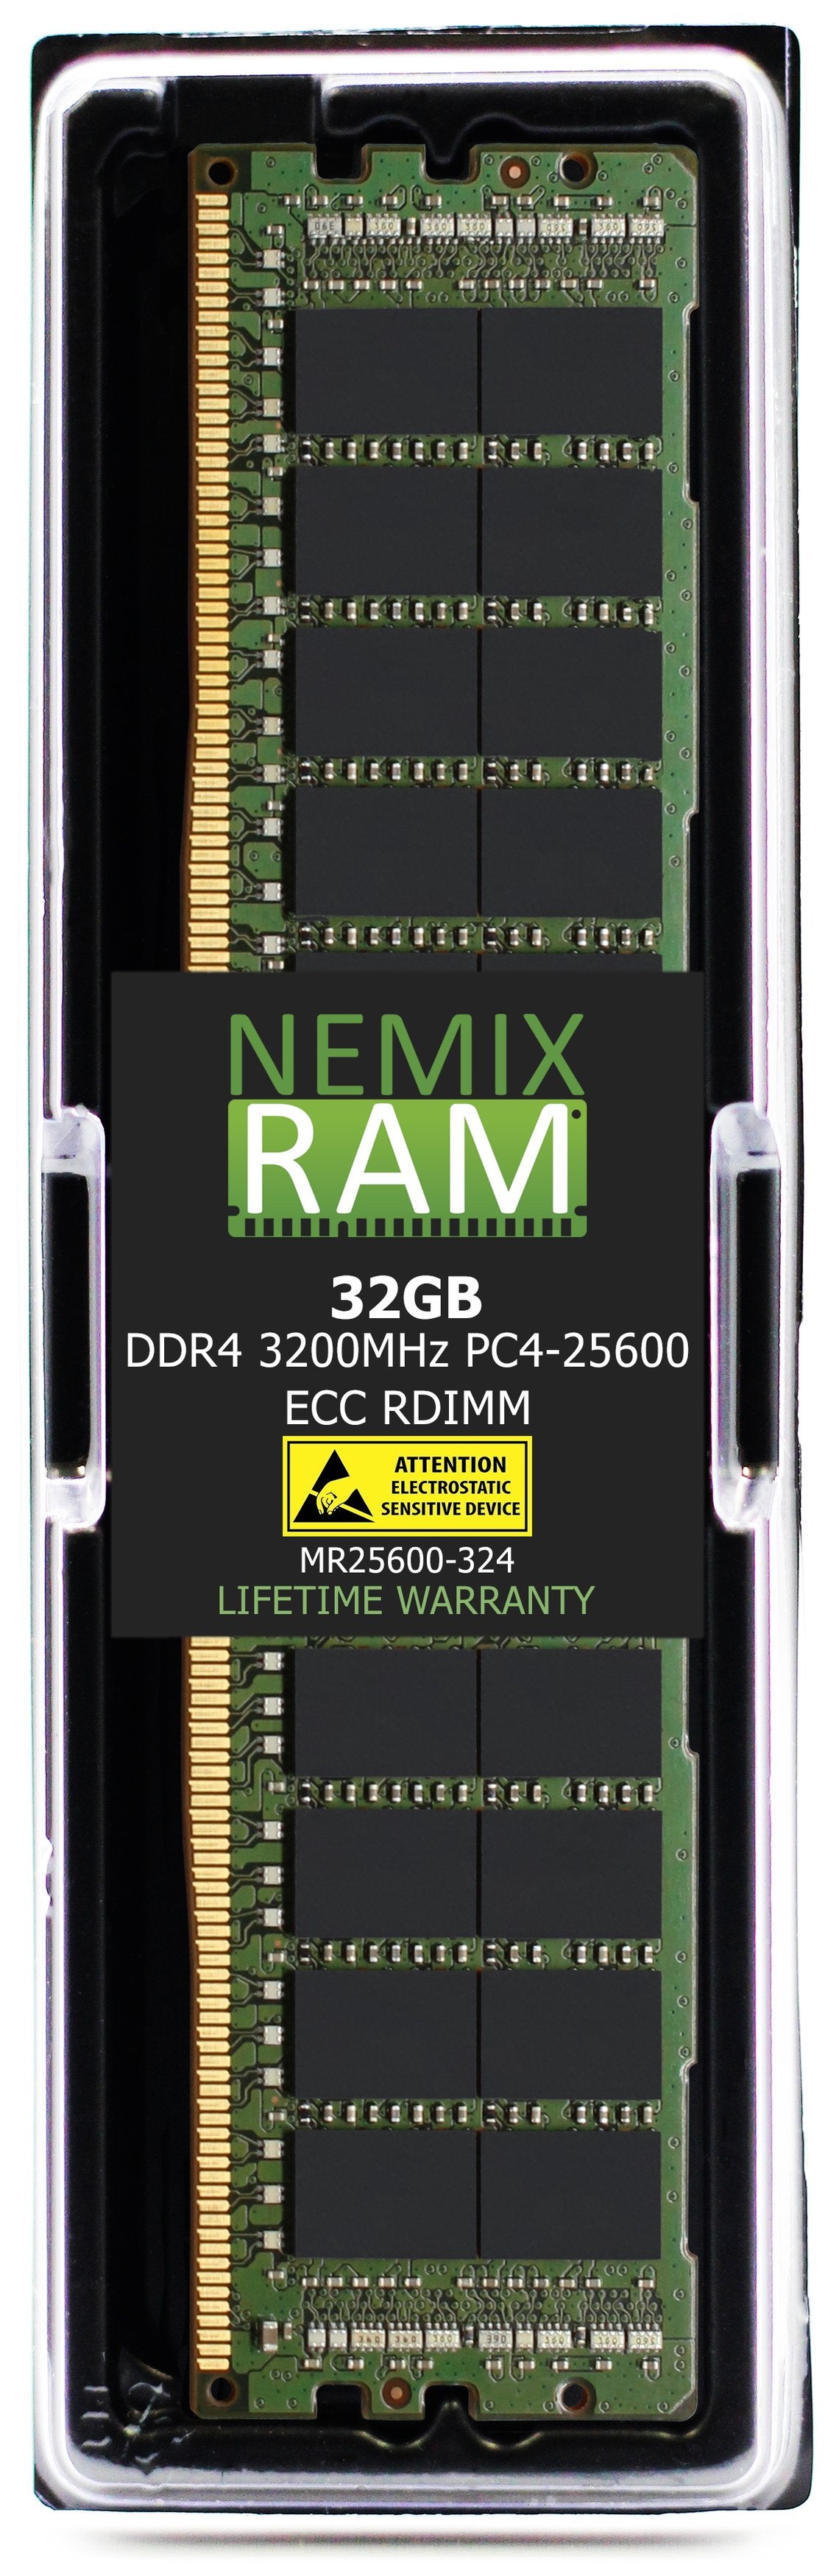 32GB DDR4 3200MHZ PC4-25600 RDIMM Compatible with Supermicro MEM-DR432LC-ER32